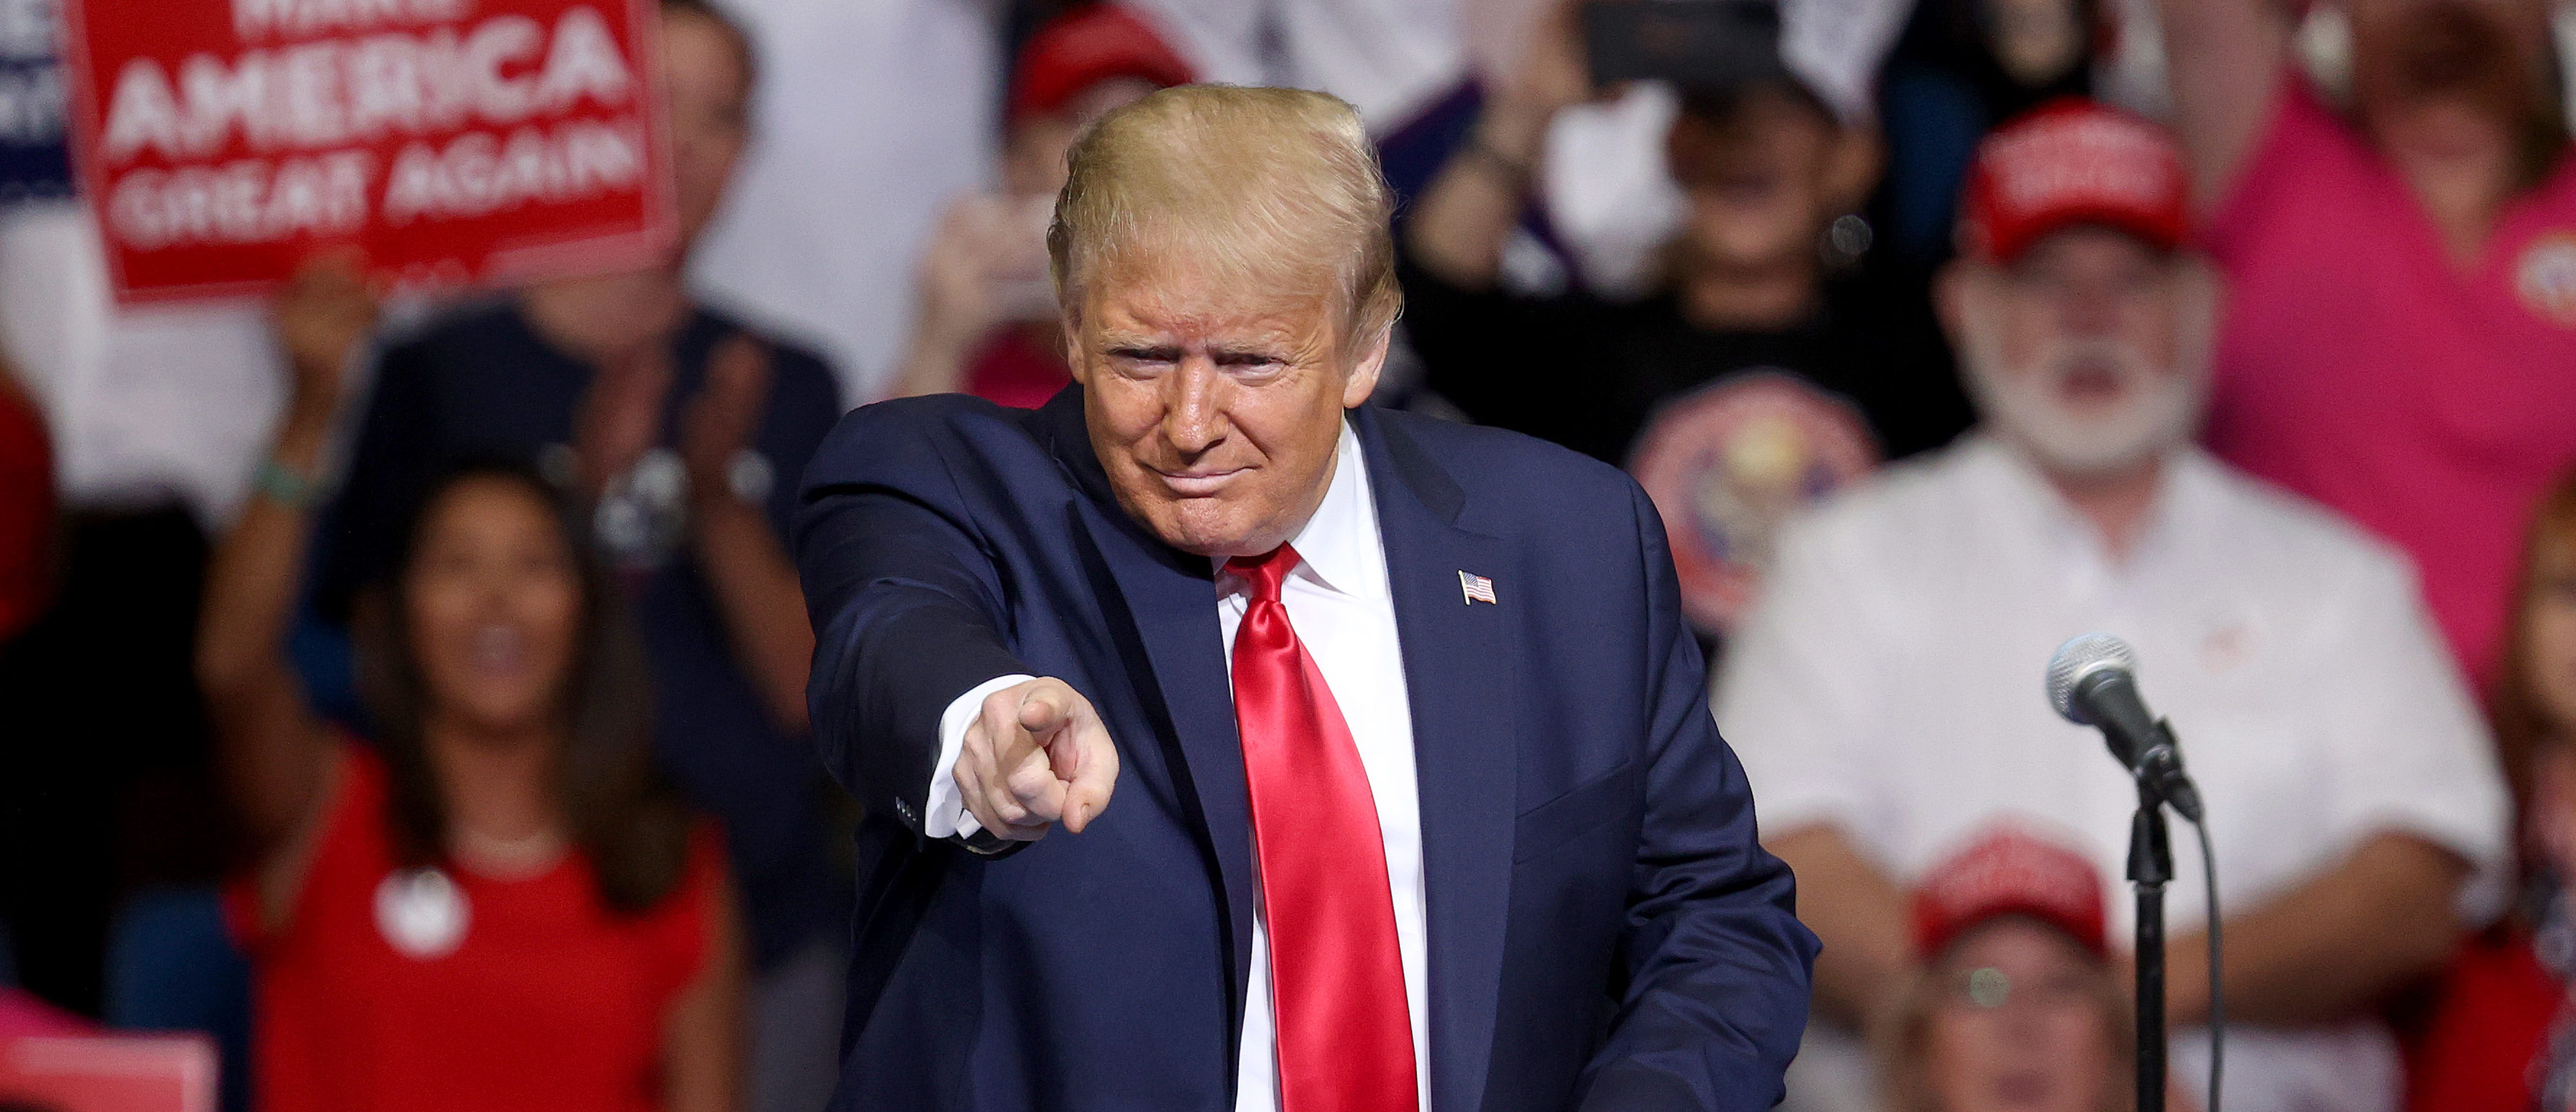 U.S. President Donald Trump arrives at a campaign rally at the BOK Center, June 20, 2020 in Tulsa, Oklahoma. (Win McNamee/Getty Images)